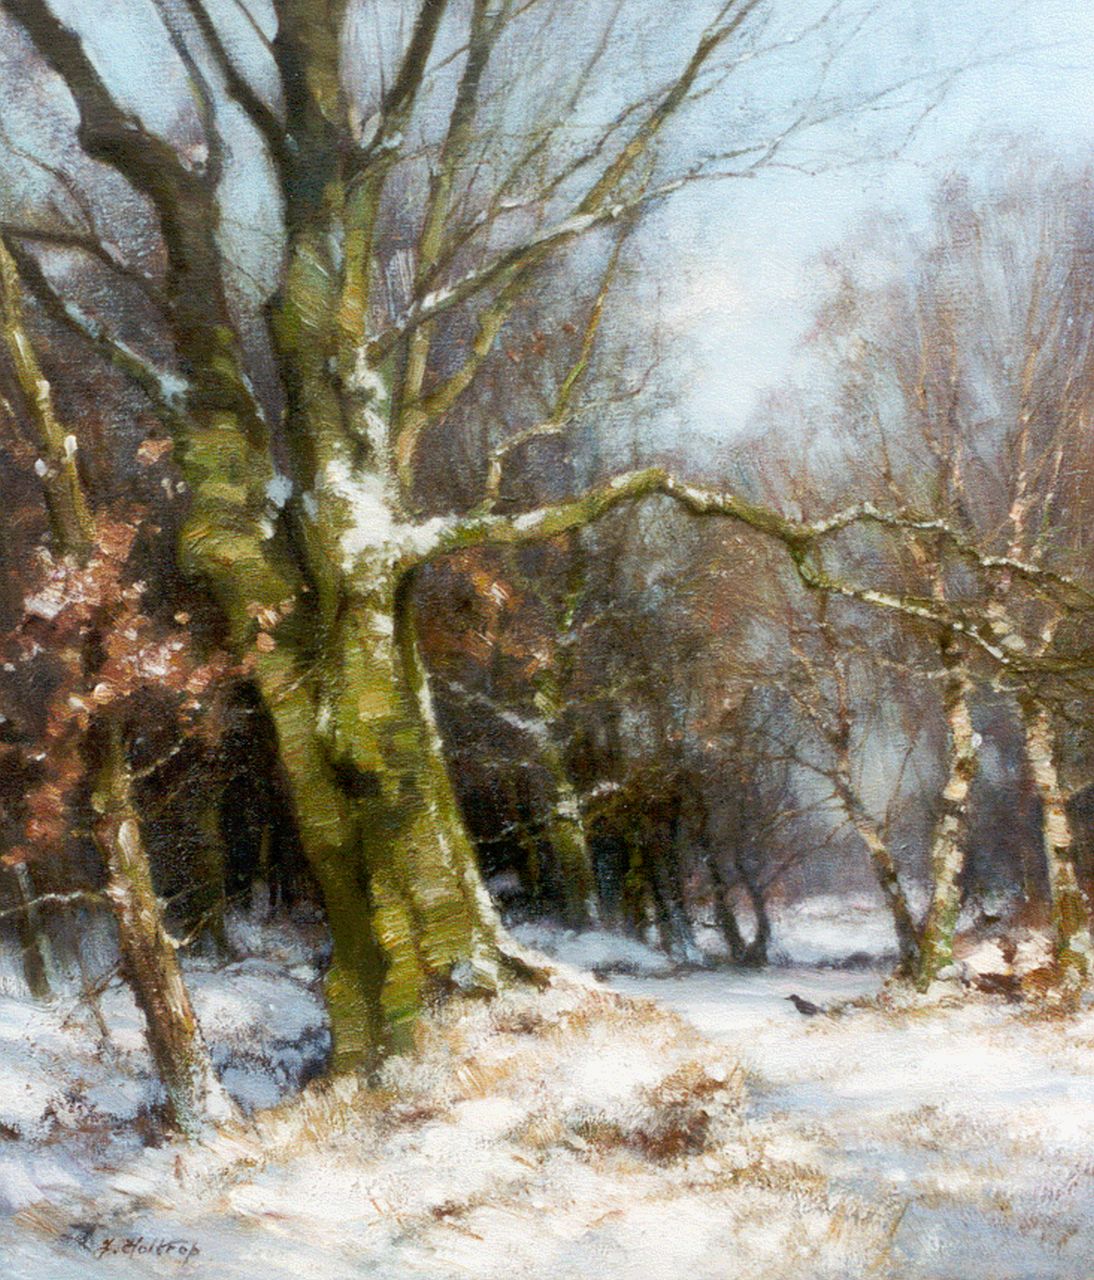 Holtrup J.  | Jan Holtrup, Winter in the Wolfheze forest, oil on canvas 40.4 x 35.7 cm, signed l.l.